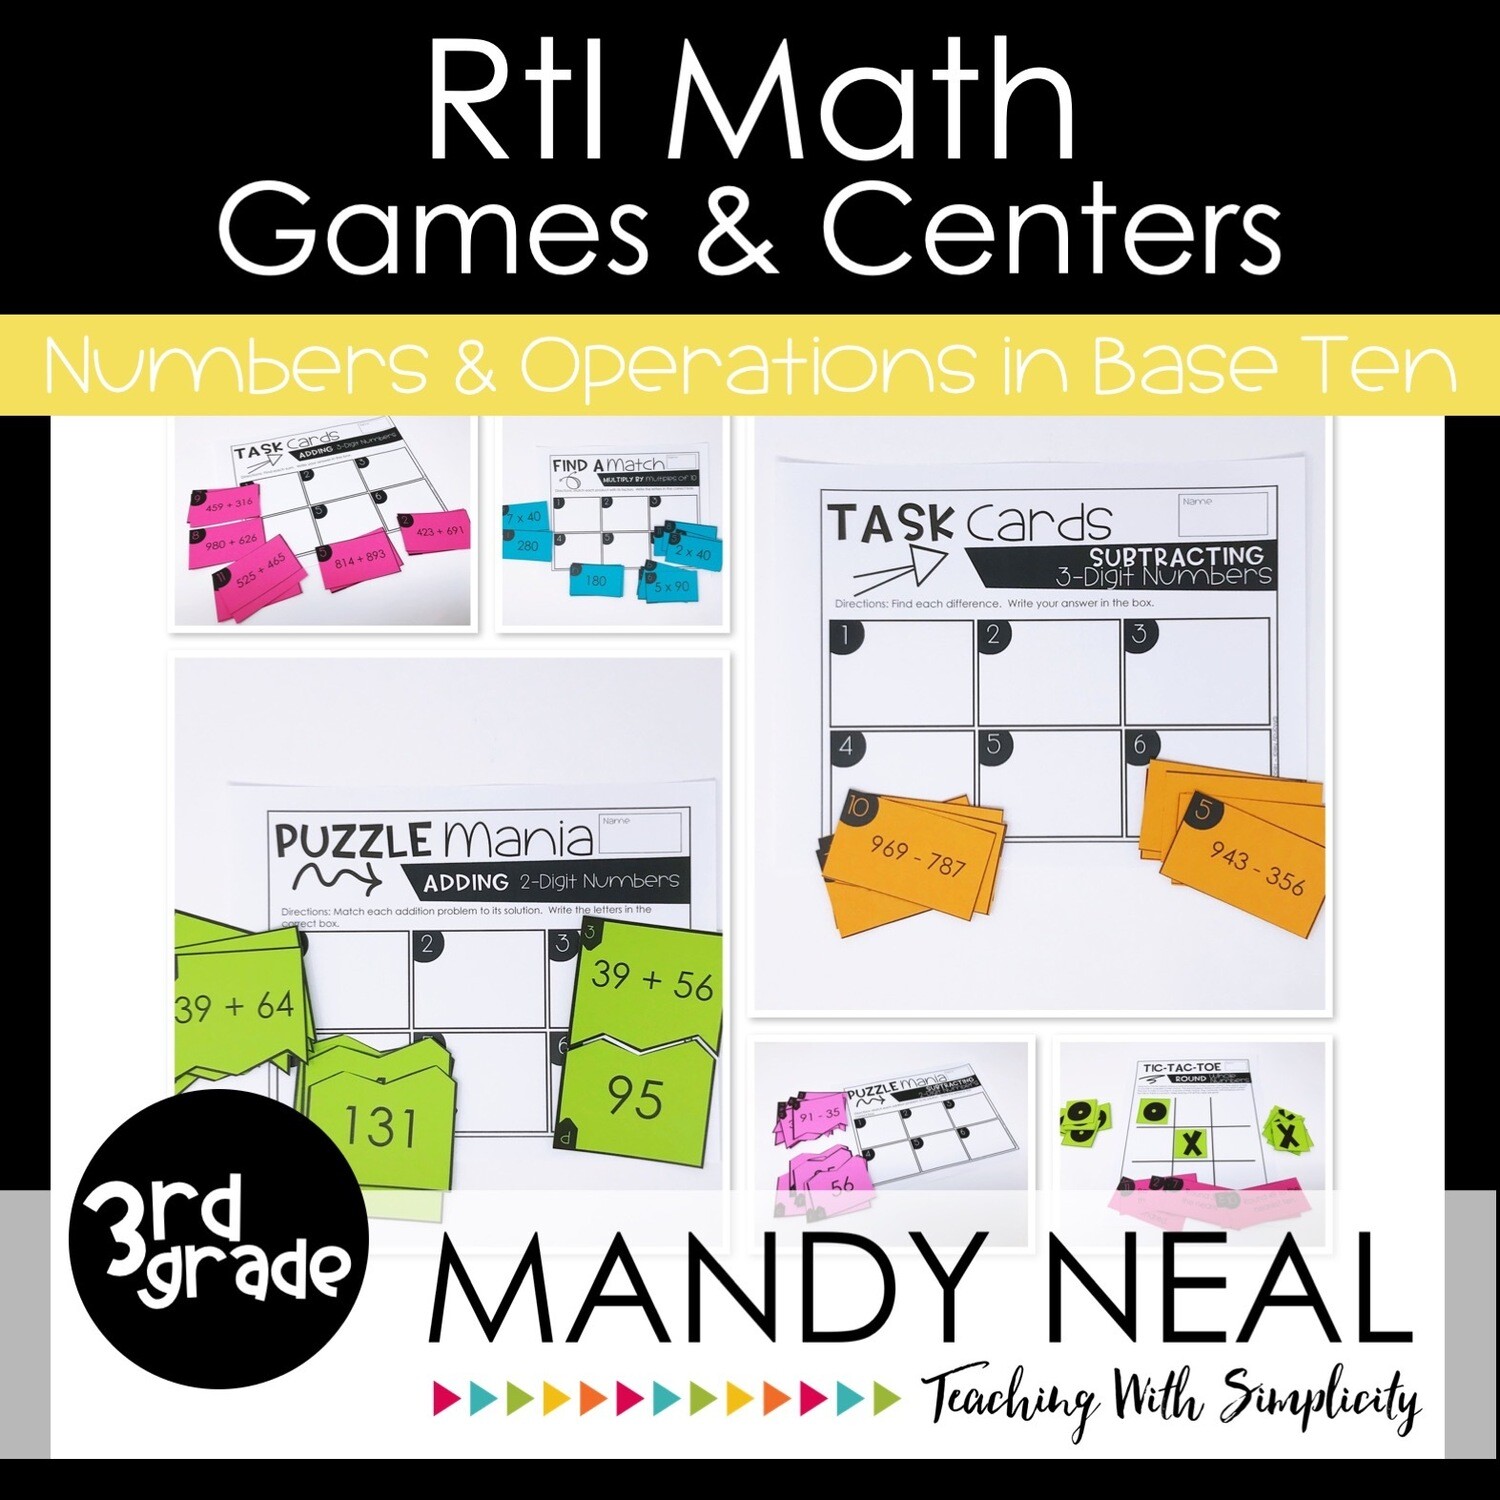 3rd Grade Math Intervention Games and Centers for NBT